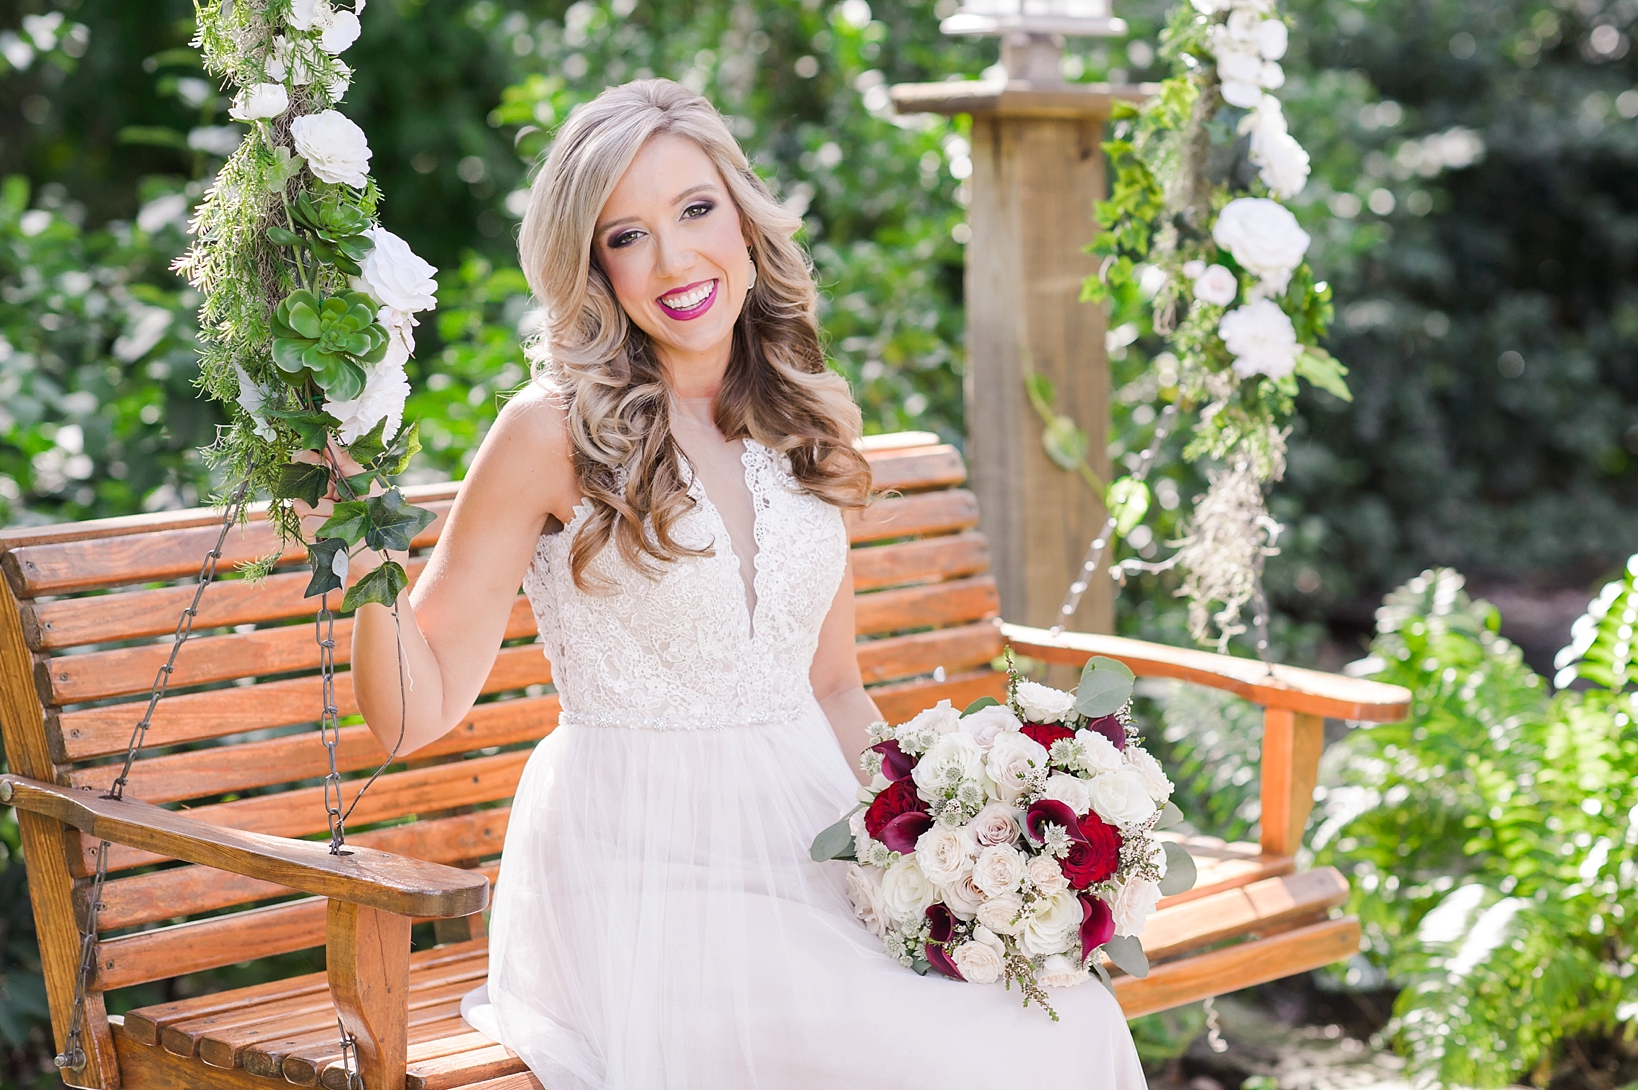 Amazing portrait of a Bride on her wedding day sitting on a bench swing by Sarah & Ben Photography 